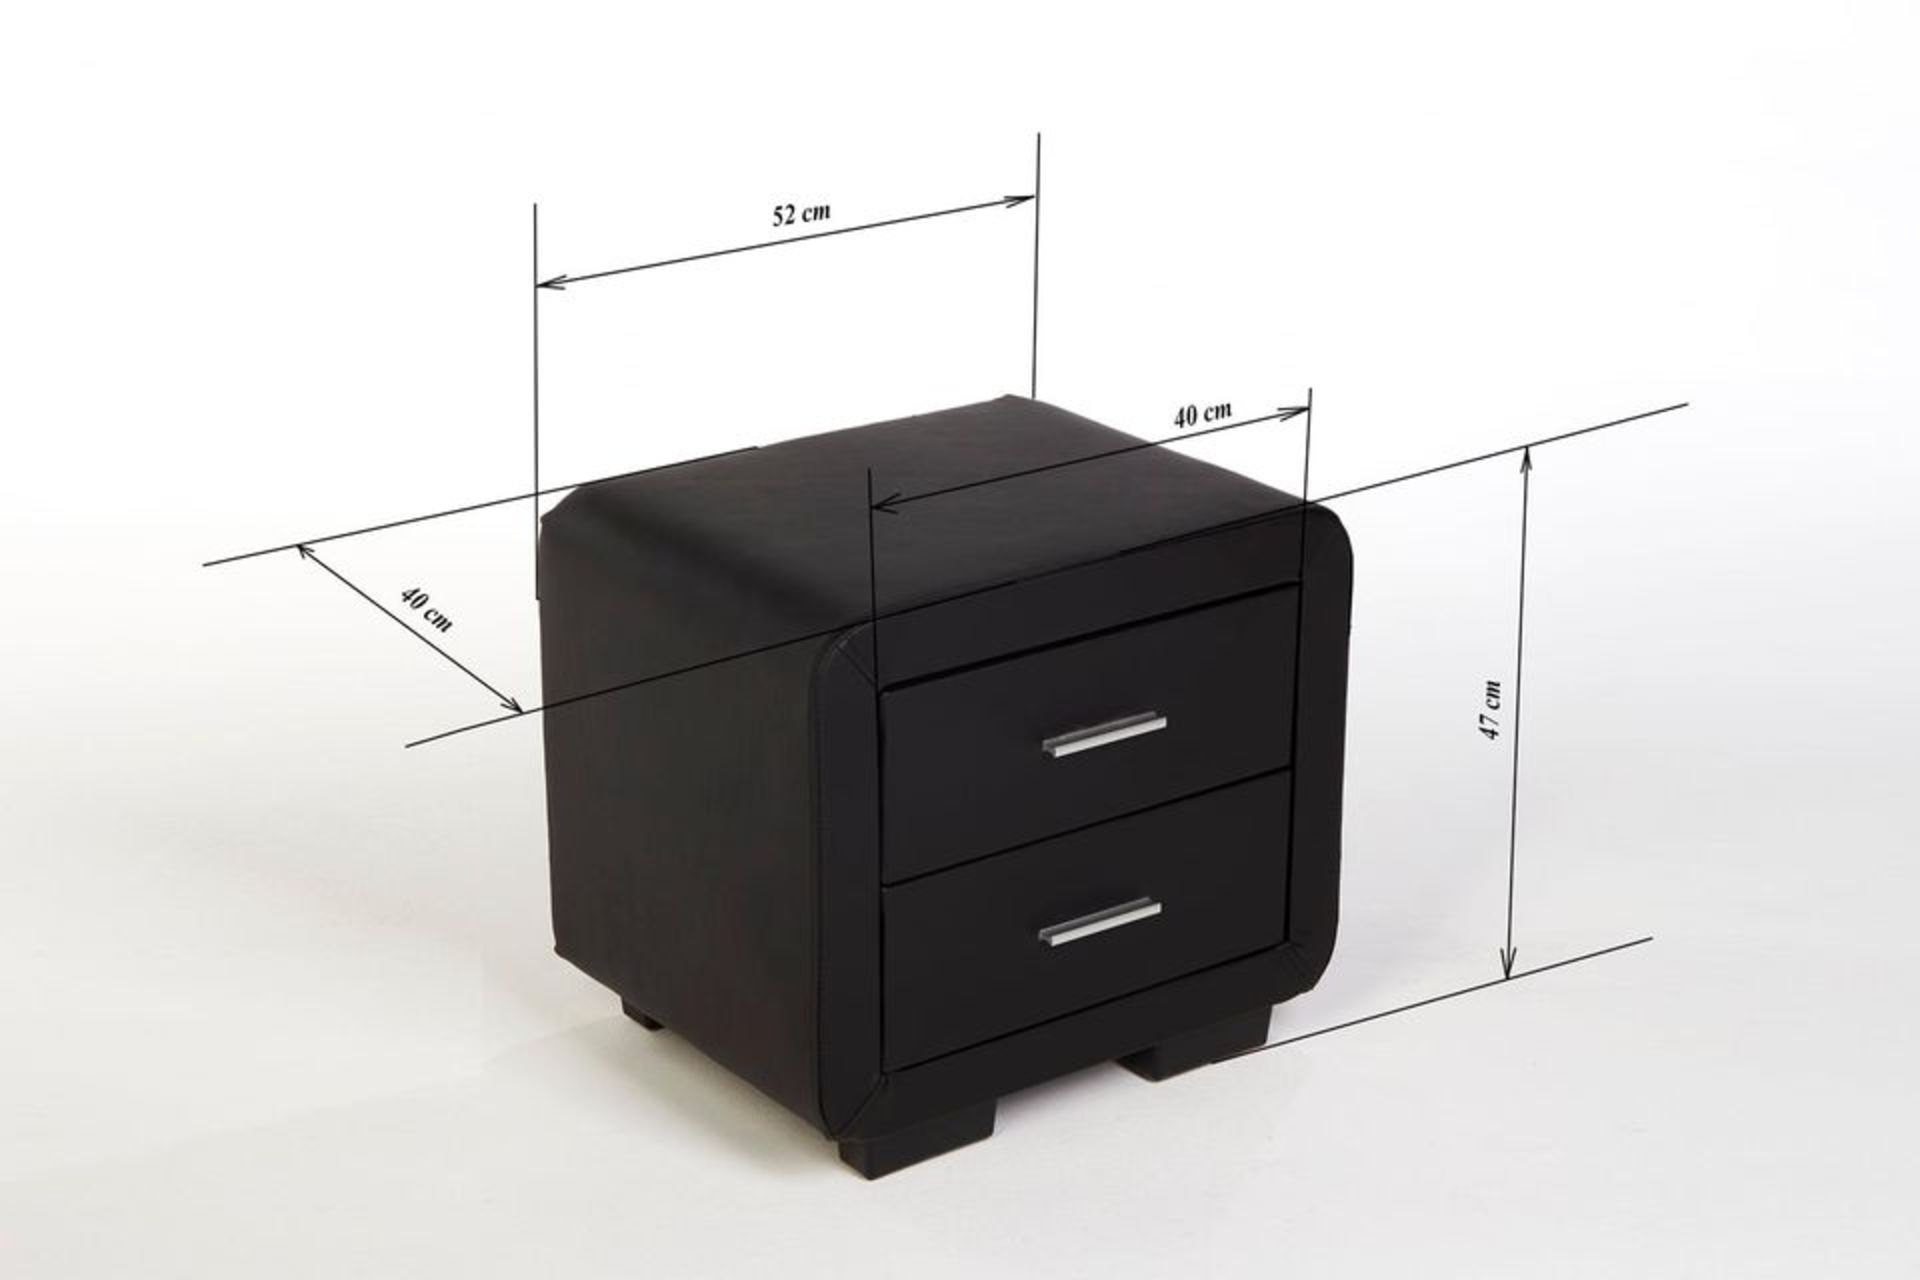 DESIGNER BEDSIDE TABLE CABINET NIGHT STAND FAUX LEATHER - BLACK - Image 6 of 6